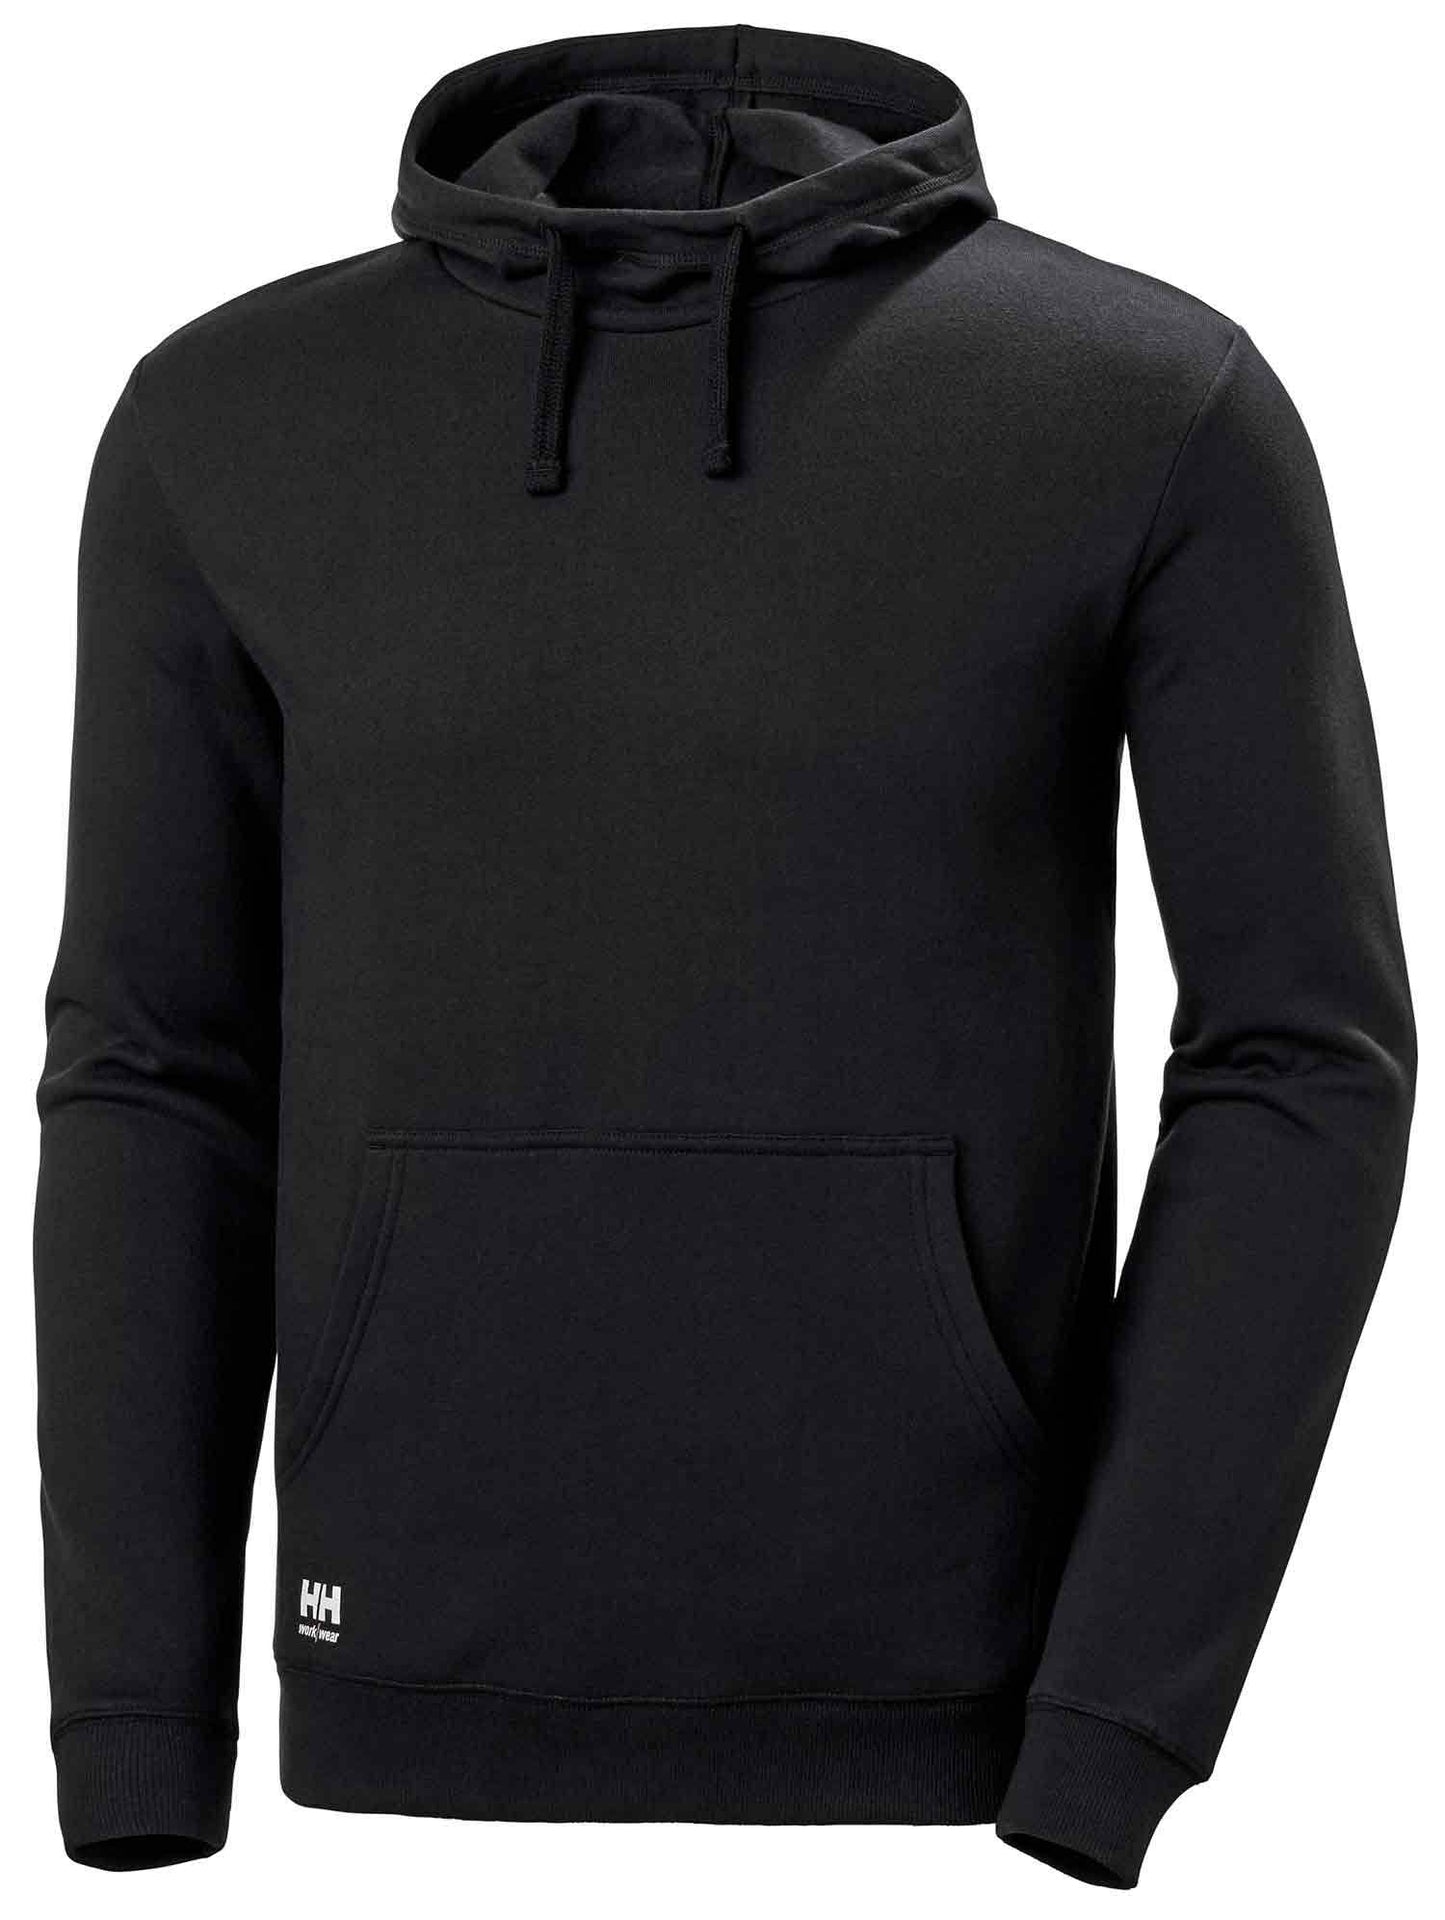 Helly Hansen Men’s Manchester Hoodie - The Luxury Promotional Gifts Company Limited